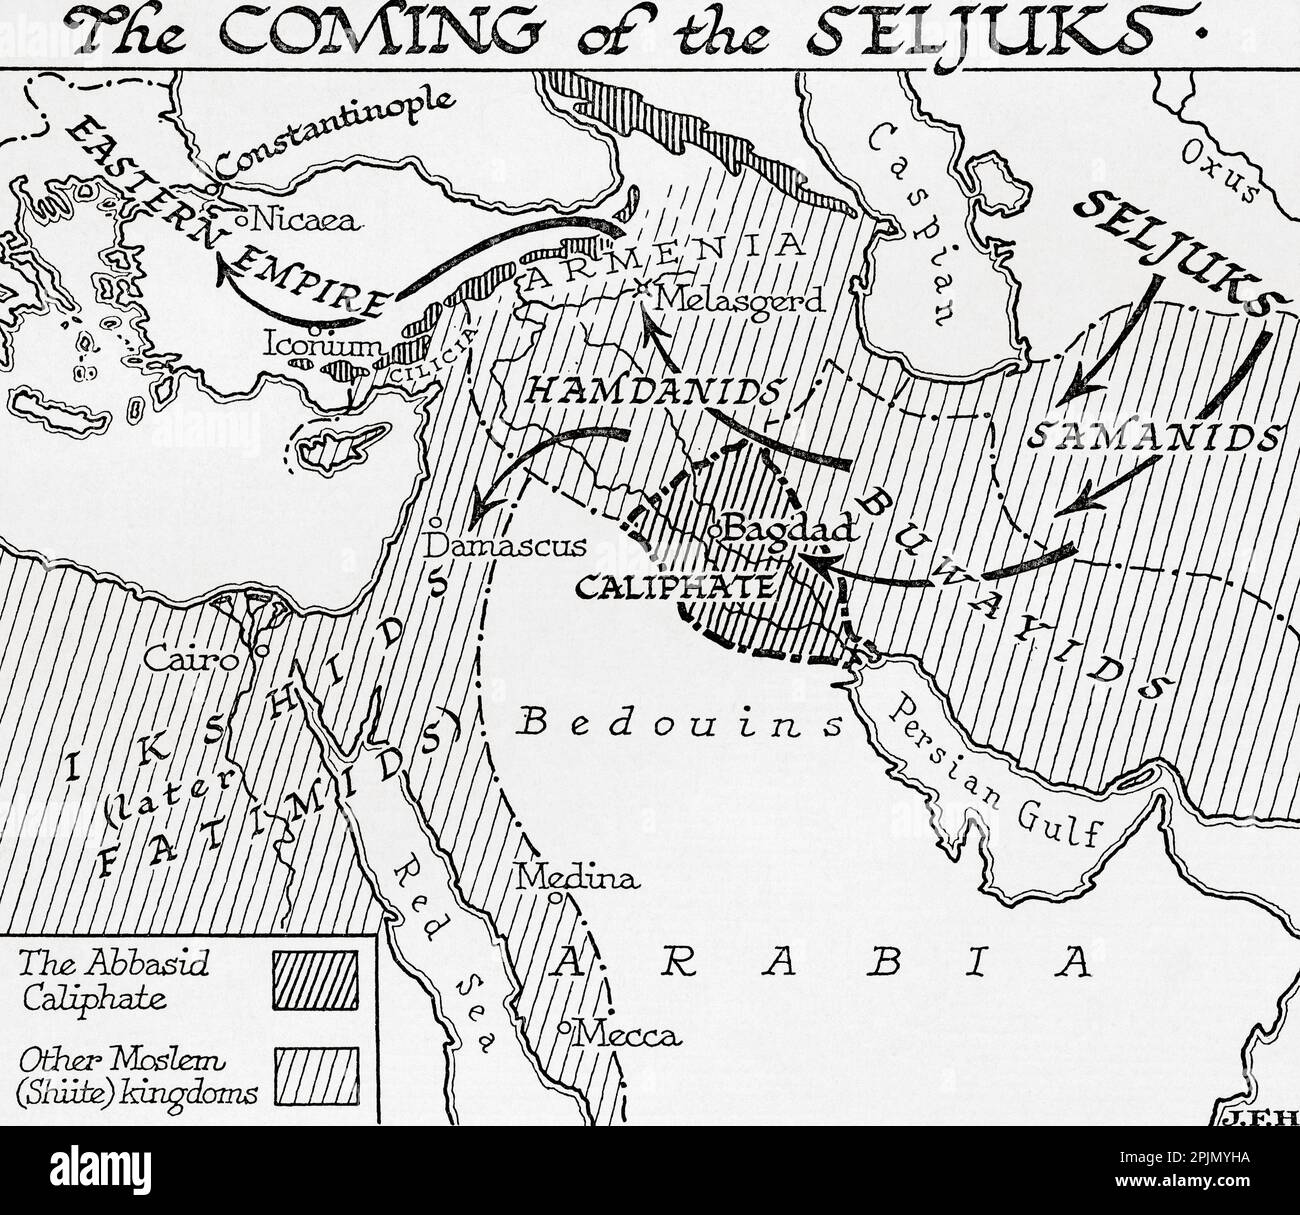 Map showing the coming of the Seljuks, 11th century.  From the book Outline of History by H.G. Wells, published 1920. Stock Photo